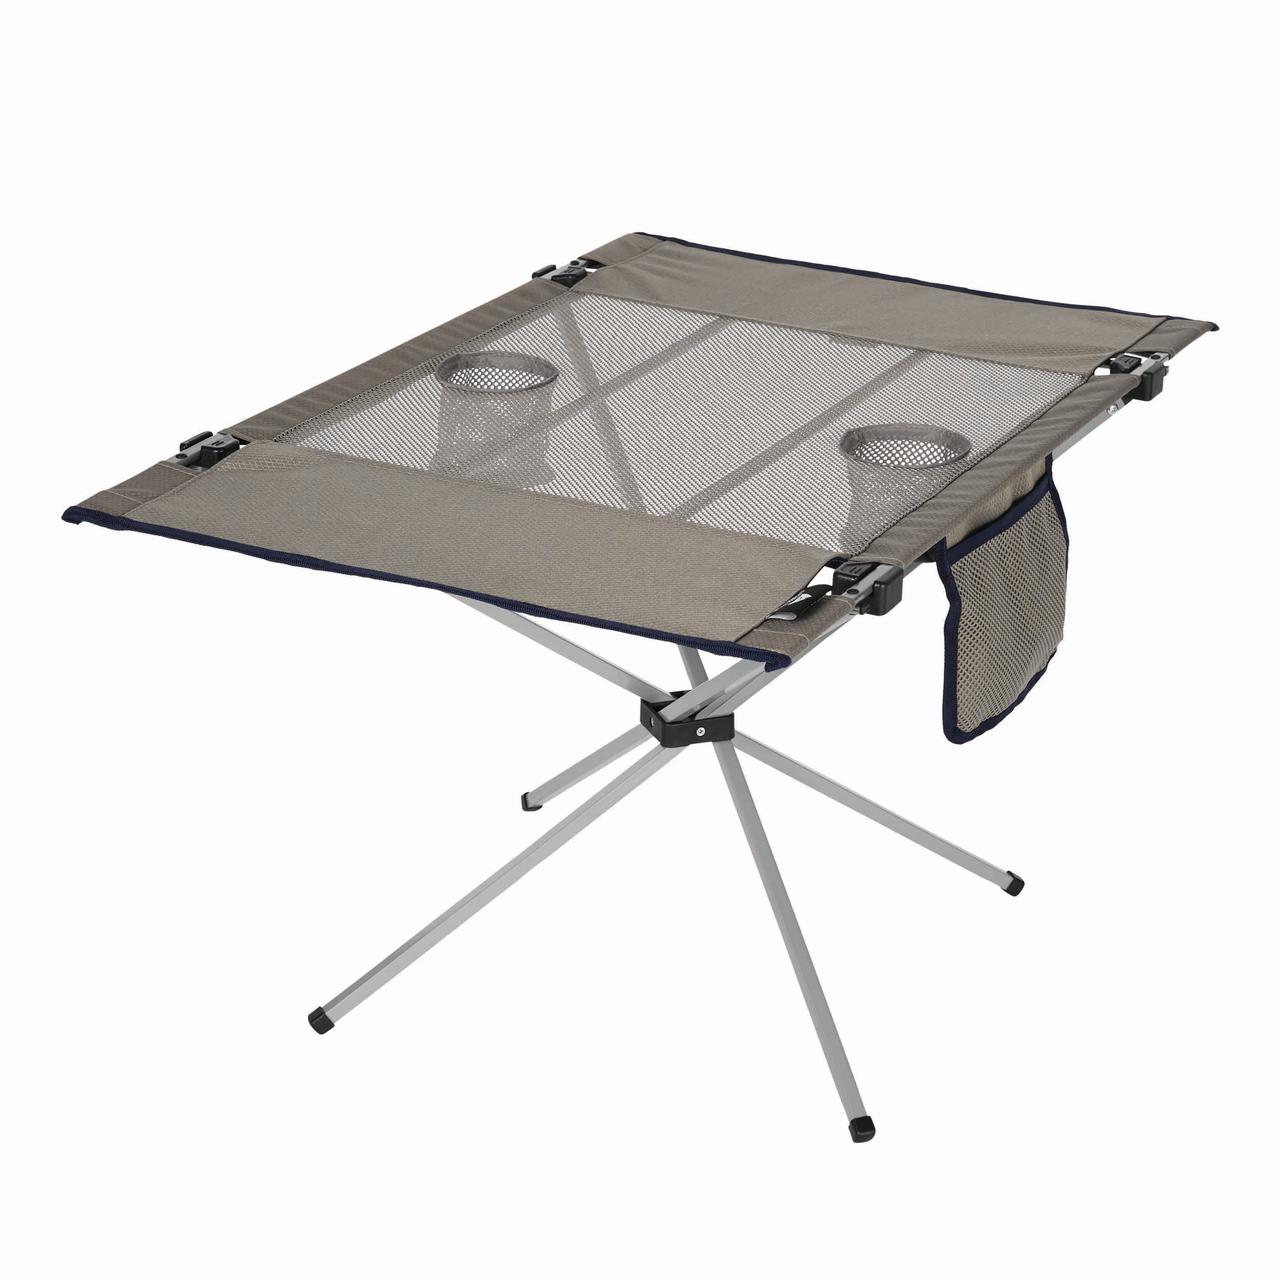 Ozark Trail Portable High-Tension Travel Table, Open Size 20.5 in x 31.5 in x 18.1 in - image 1 of 8